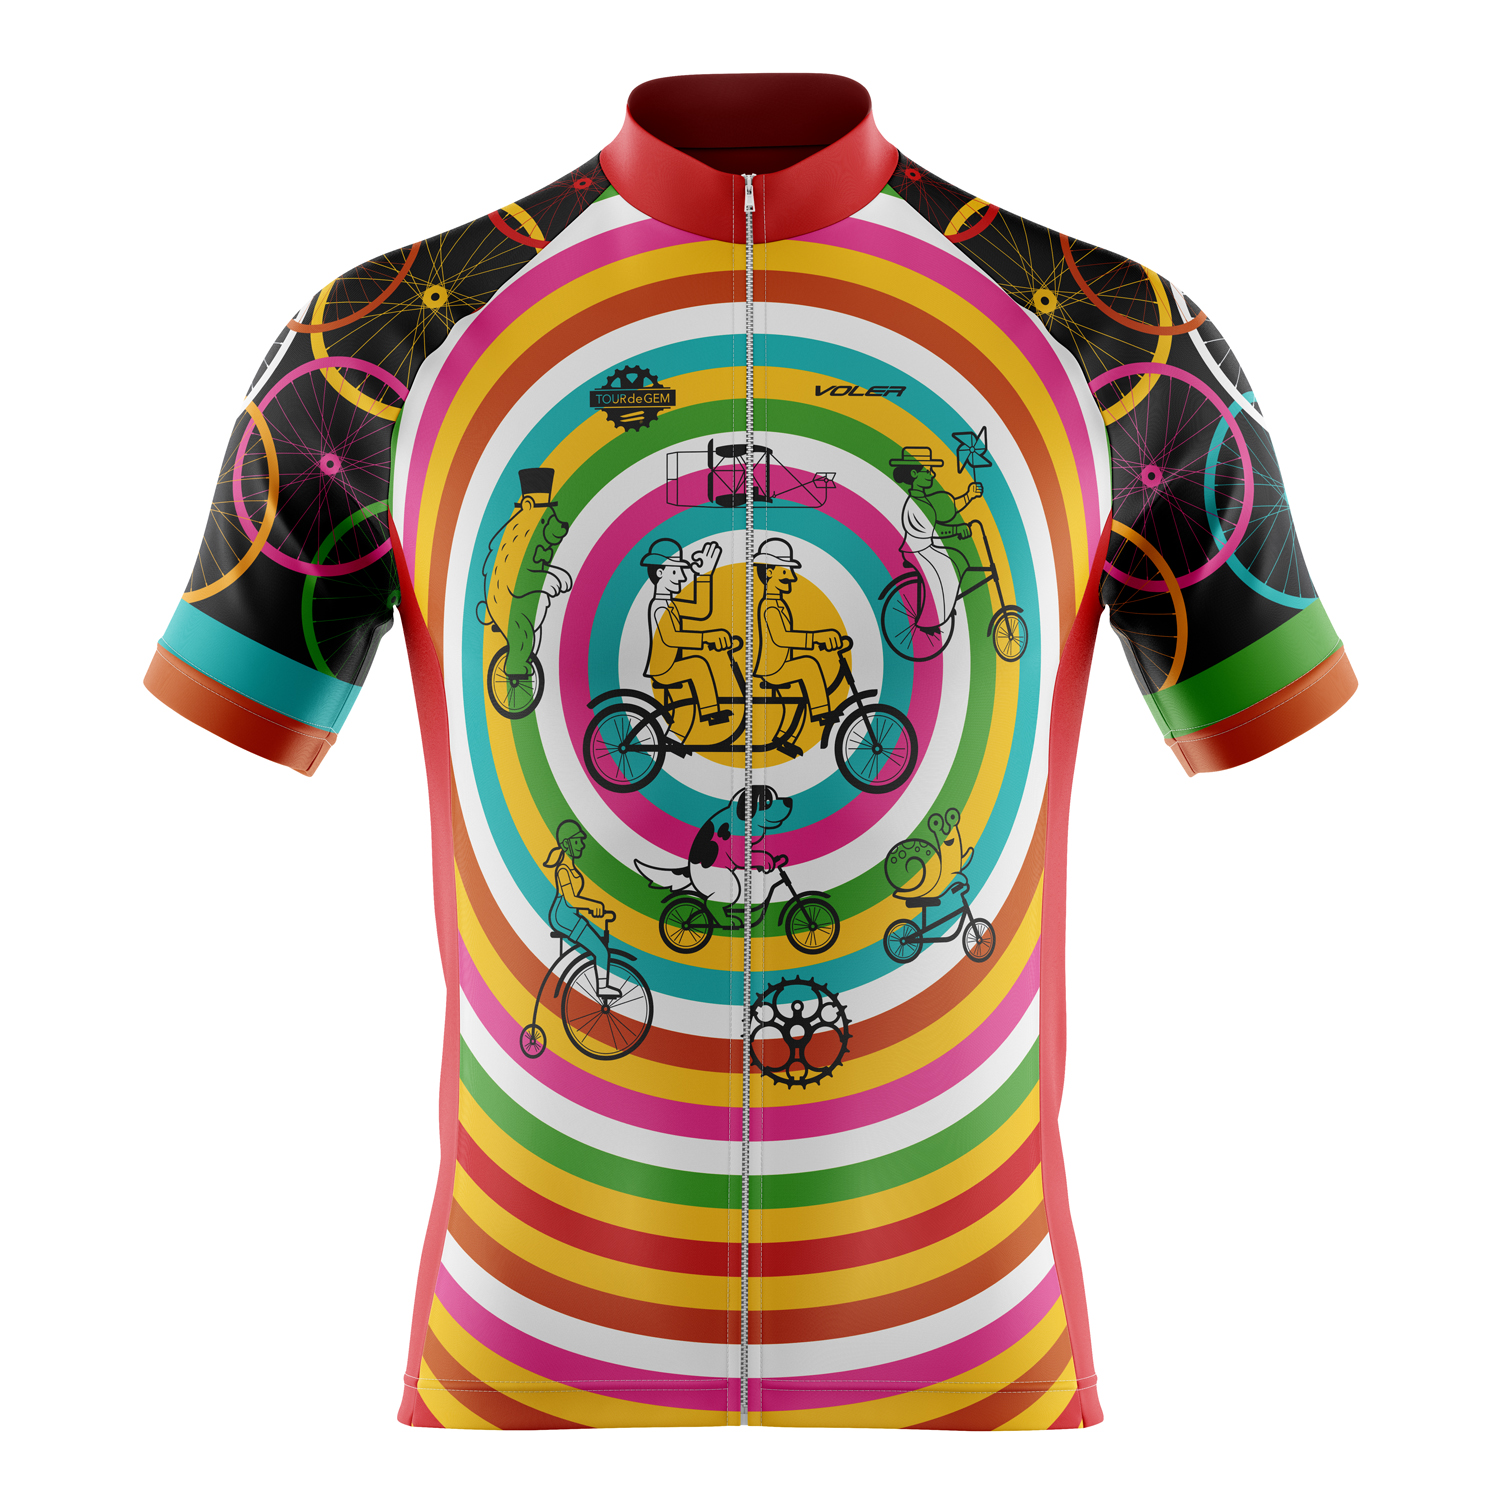 Adult 2X-Large Women's jersey